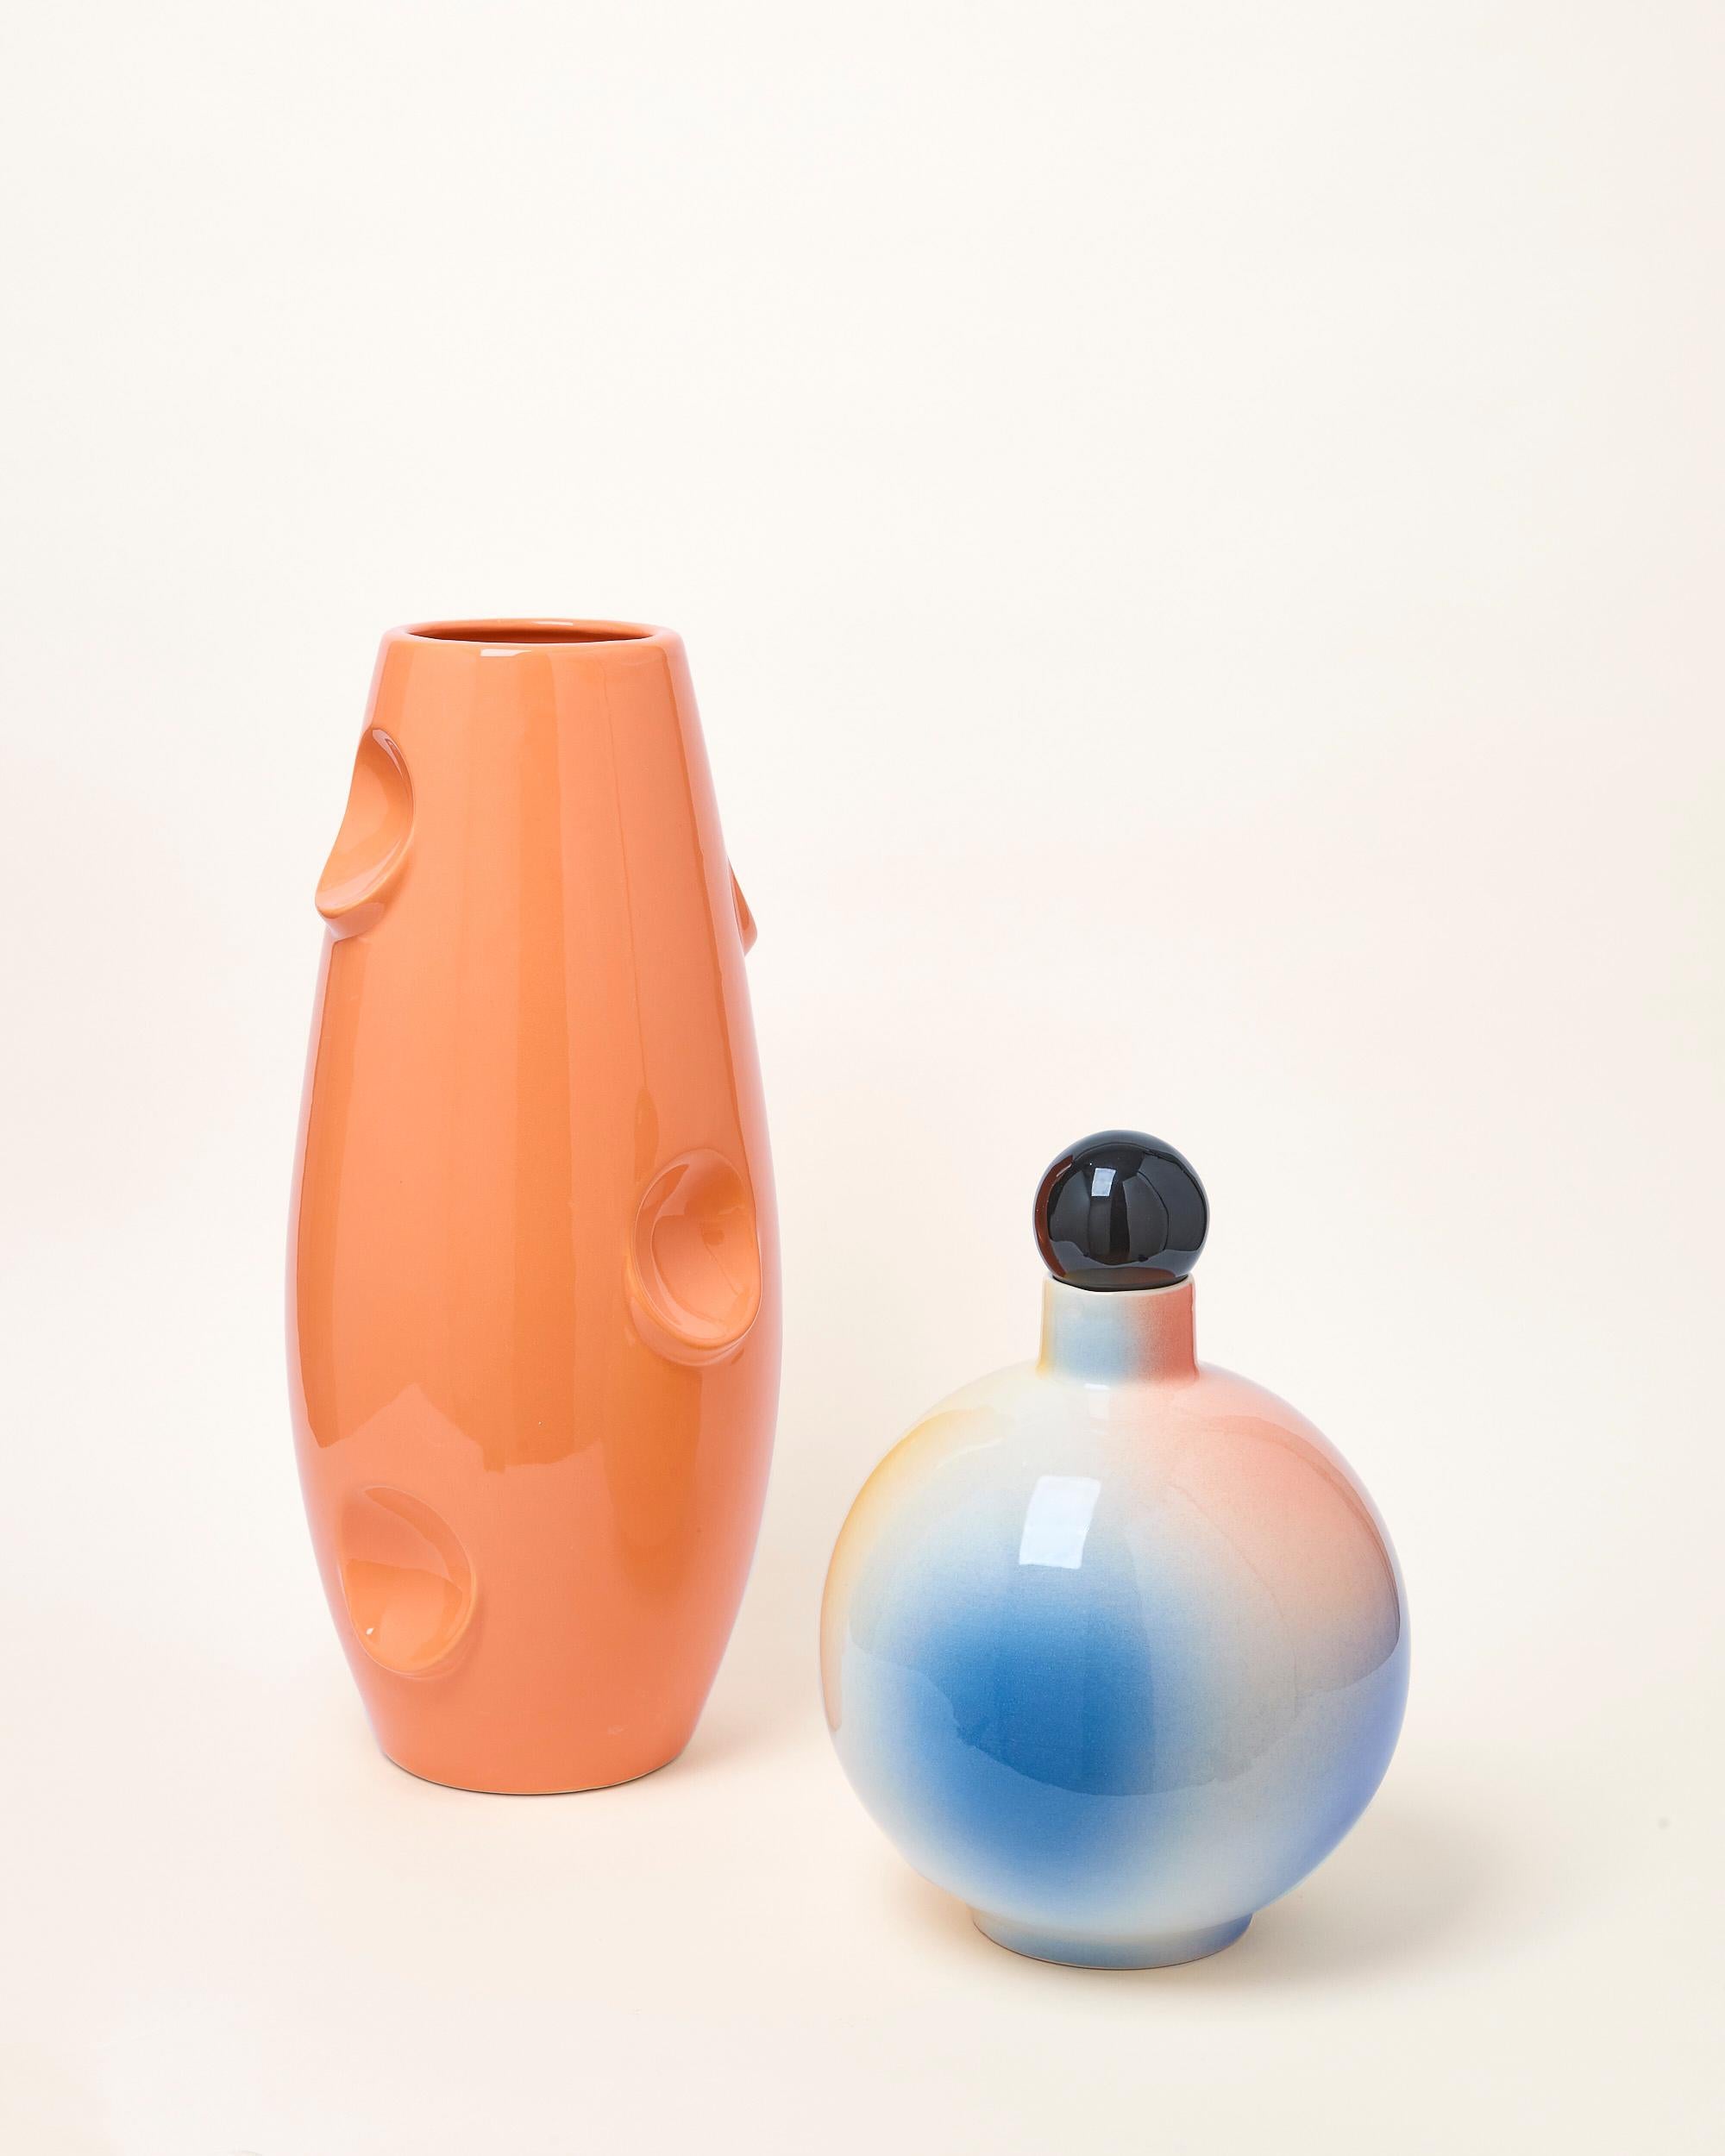 IRENA has a simple, compact spherical shape with a short cylindrical neck. The vase is made of noble ceramics and, in its classic and fully functional form, is an artistic addition to interior design. 